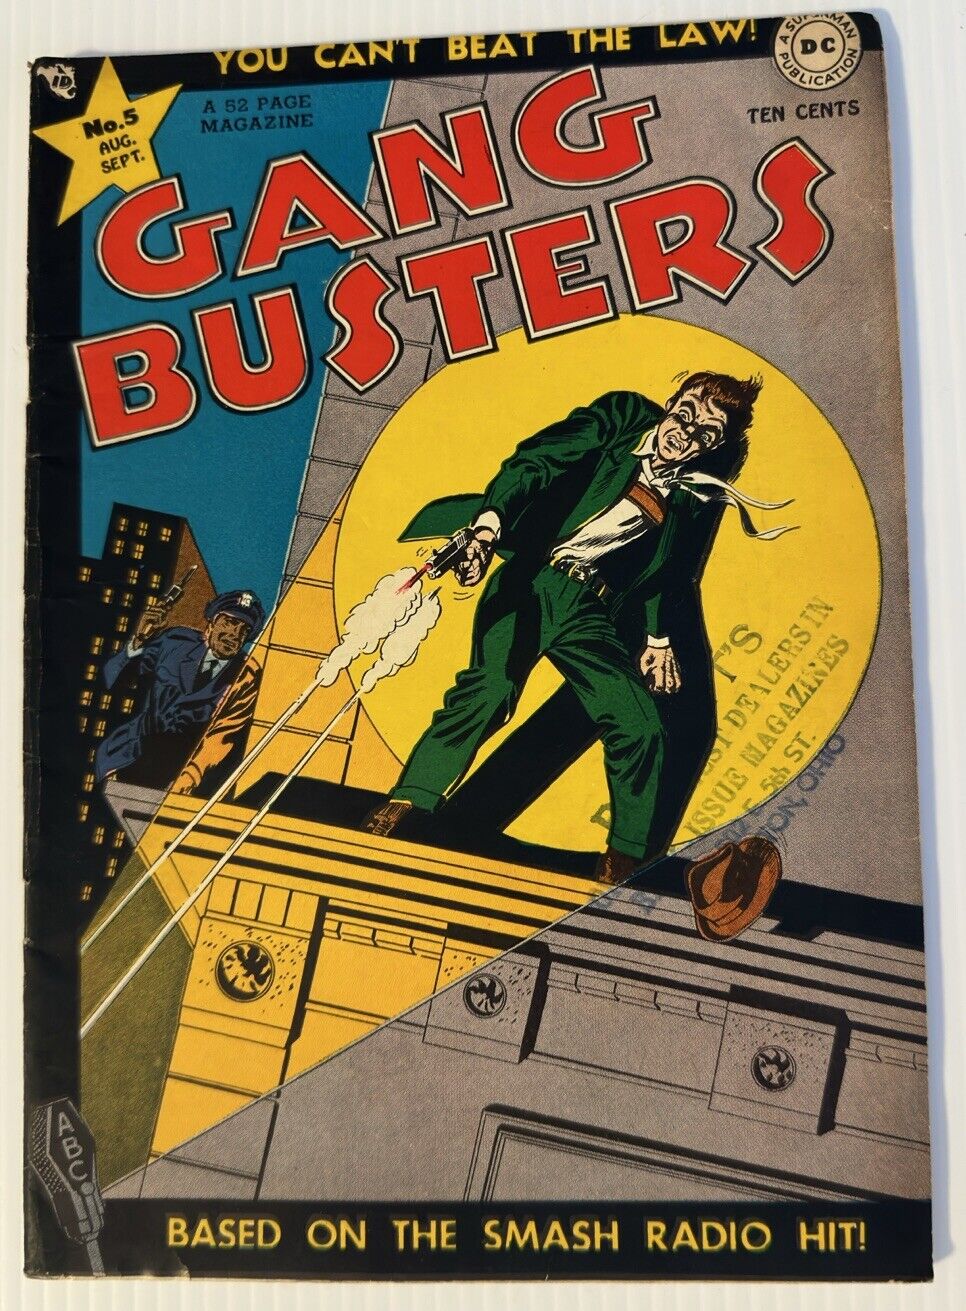 Gang Busters #5 1948 (VG+) Golden Age Pre-code Comic.